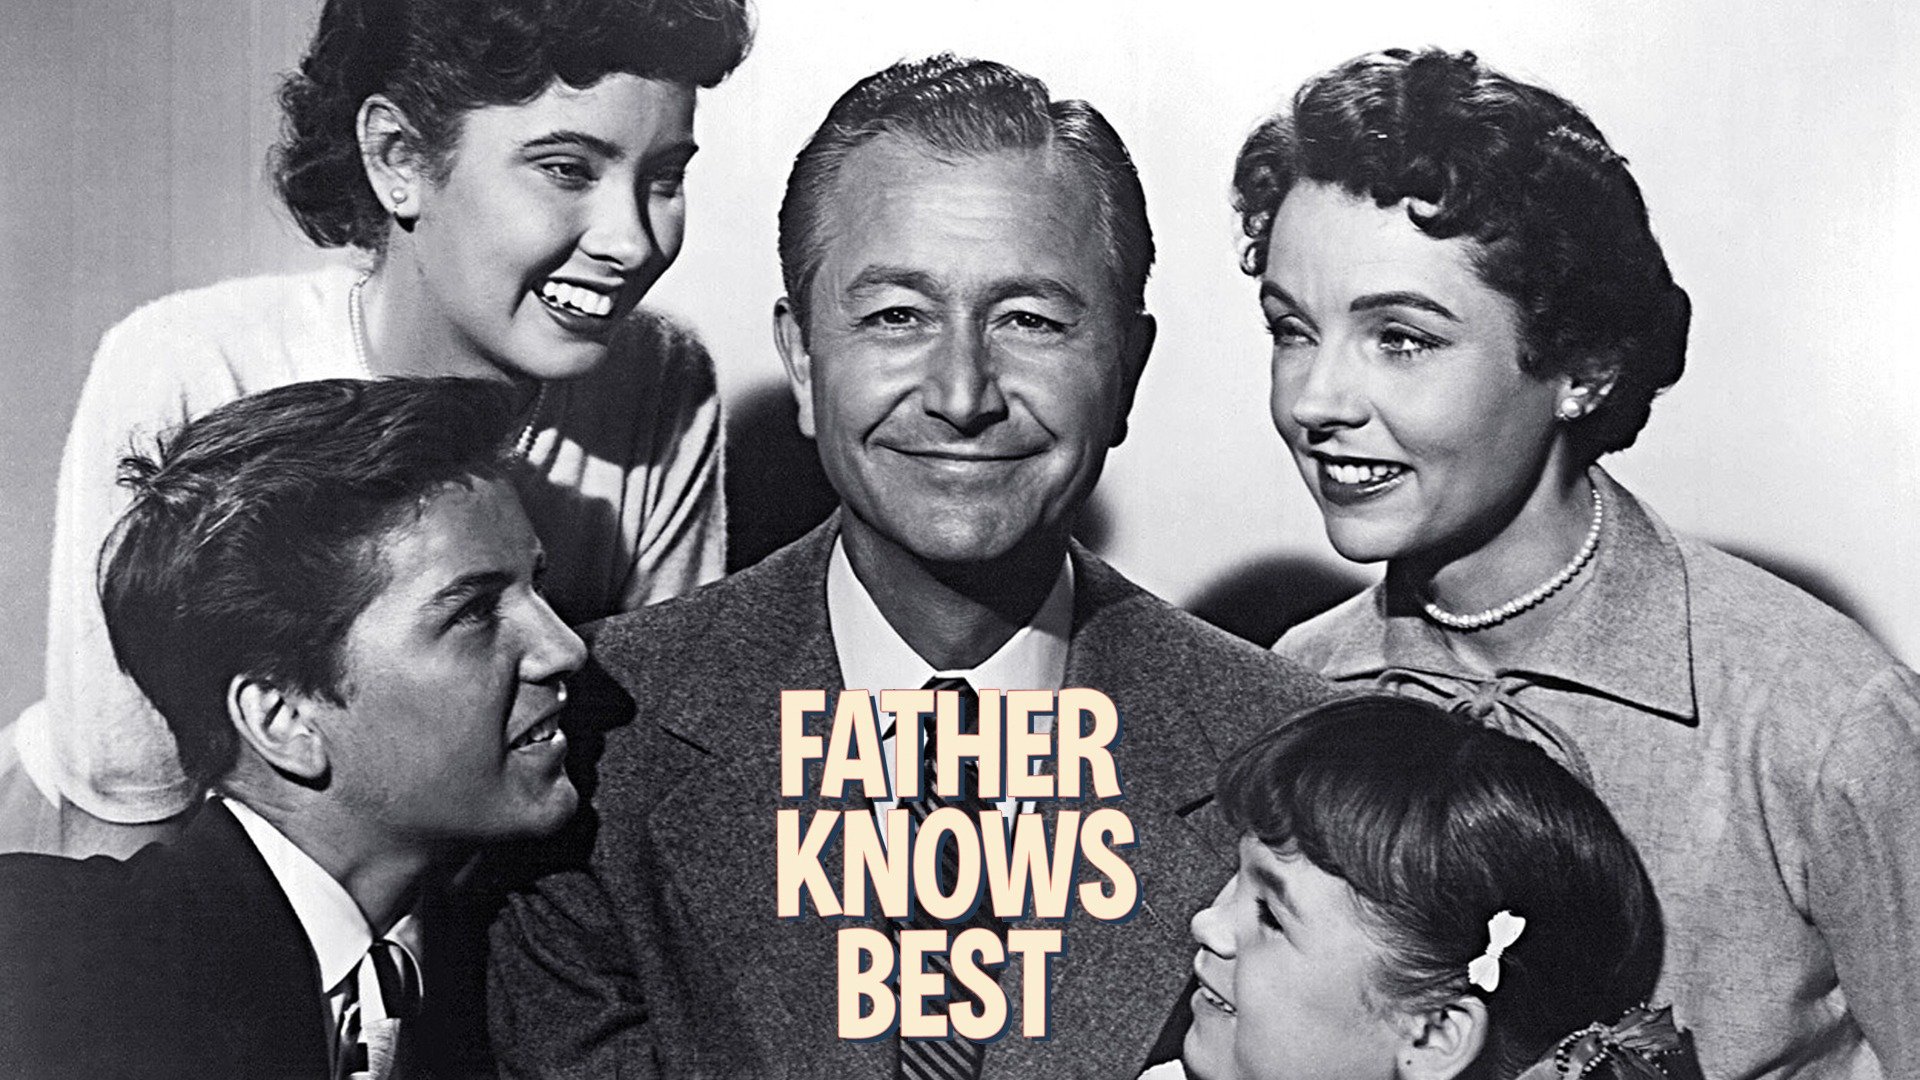 50'S-60'S FATHERS KNOWS BEST TV SHOW CAST FAMILY THANKSGIVING PUBLICITY PHOTO 